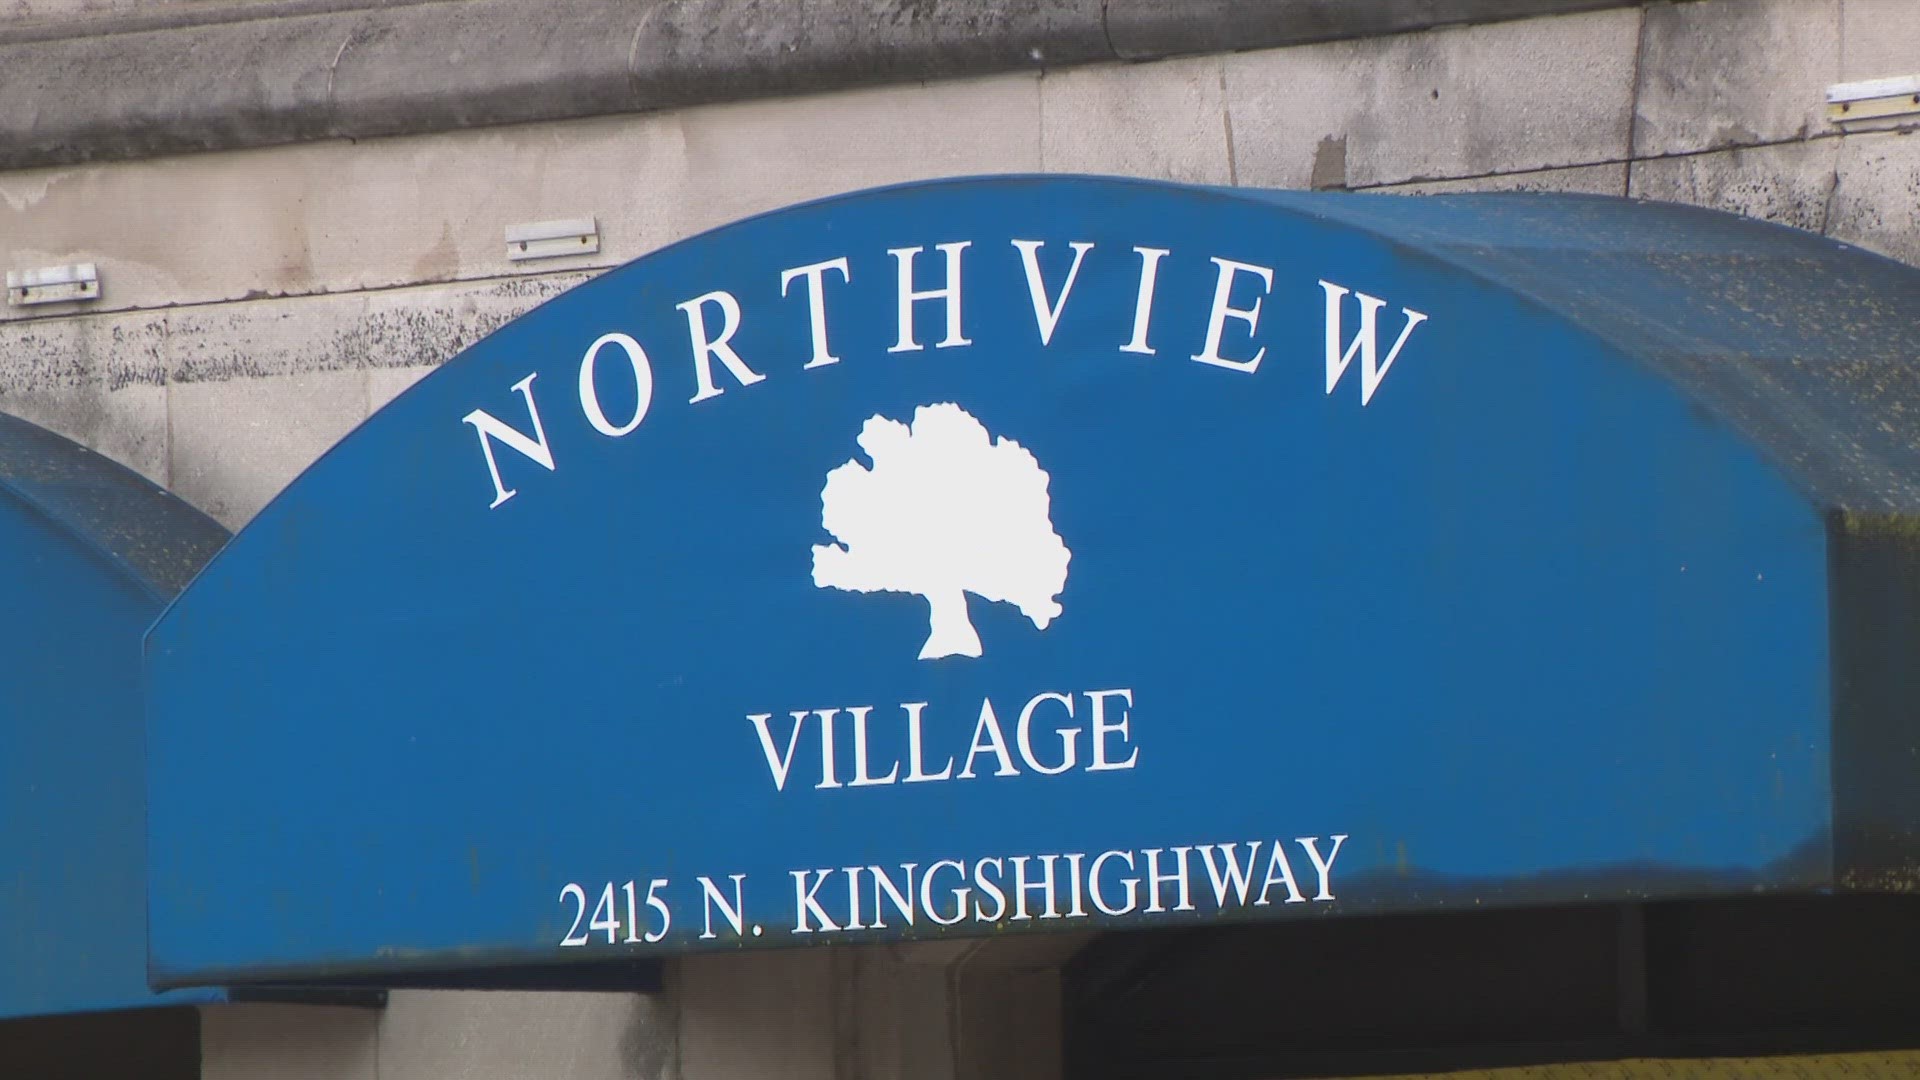 Northview Village Nursing Home displaced more than 170 residents and left more than 180 employees without a job. Those employees were not paid the wages earned.